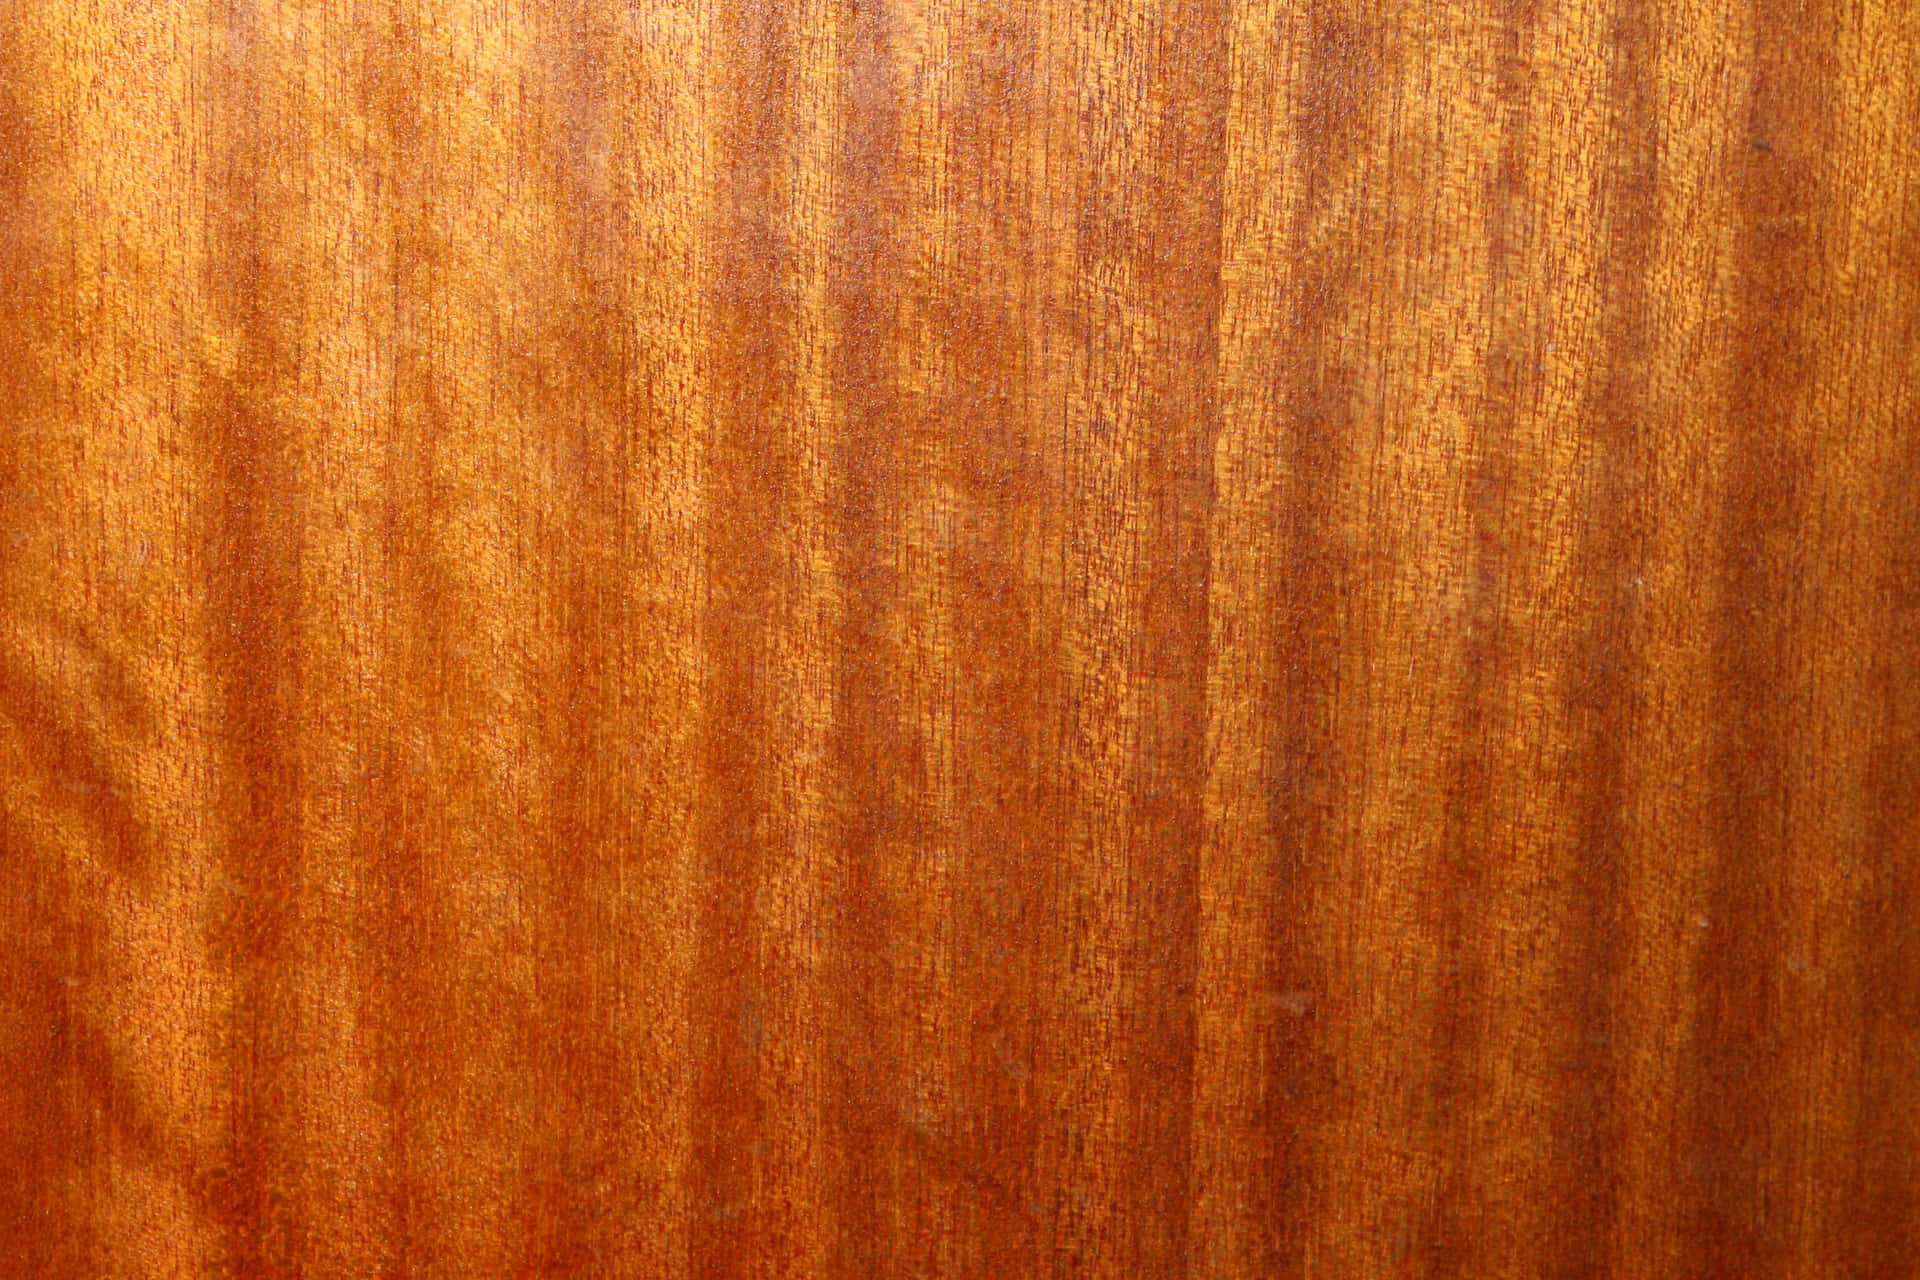 A Close Up Of A Wooden Surface